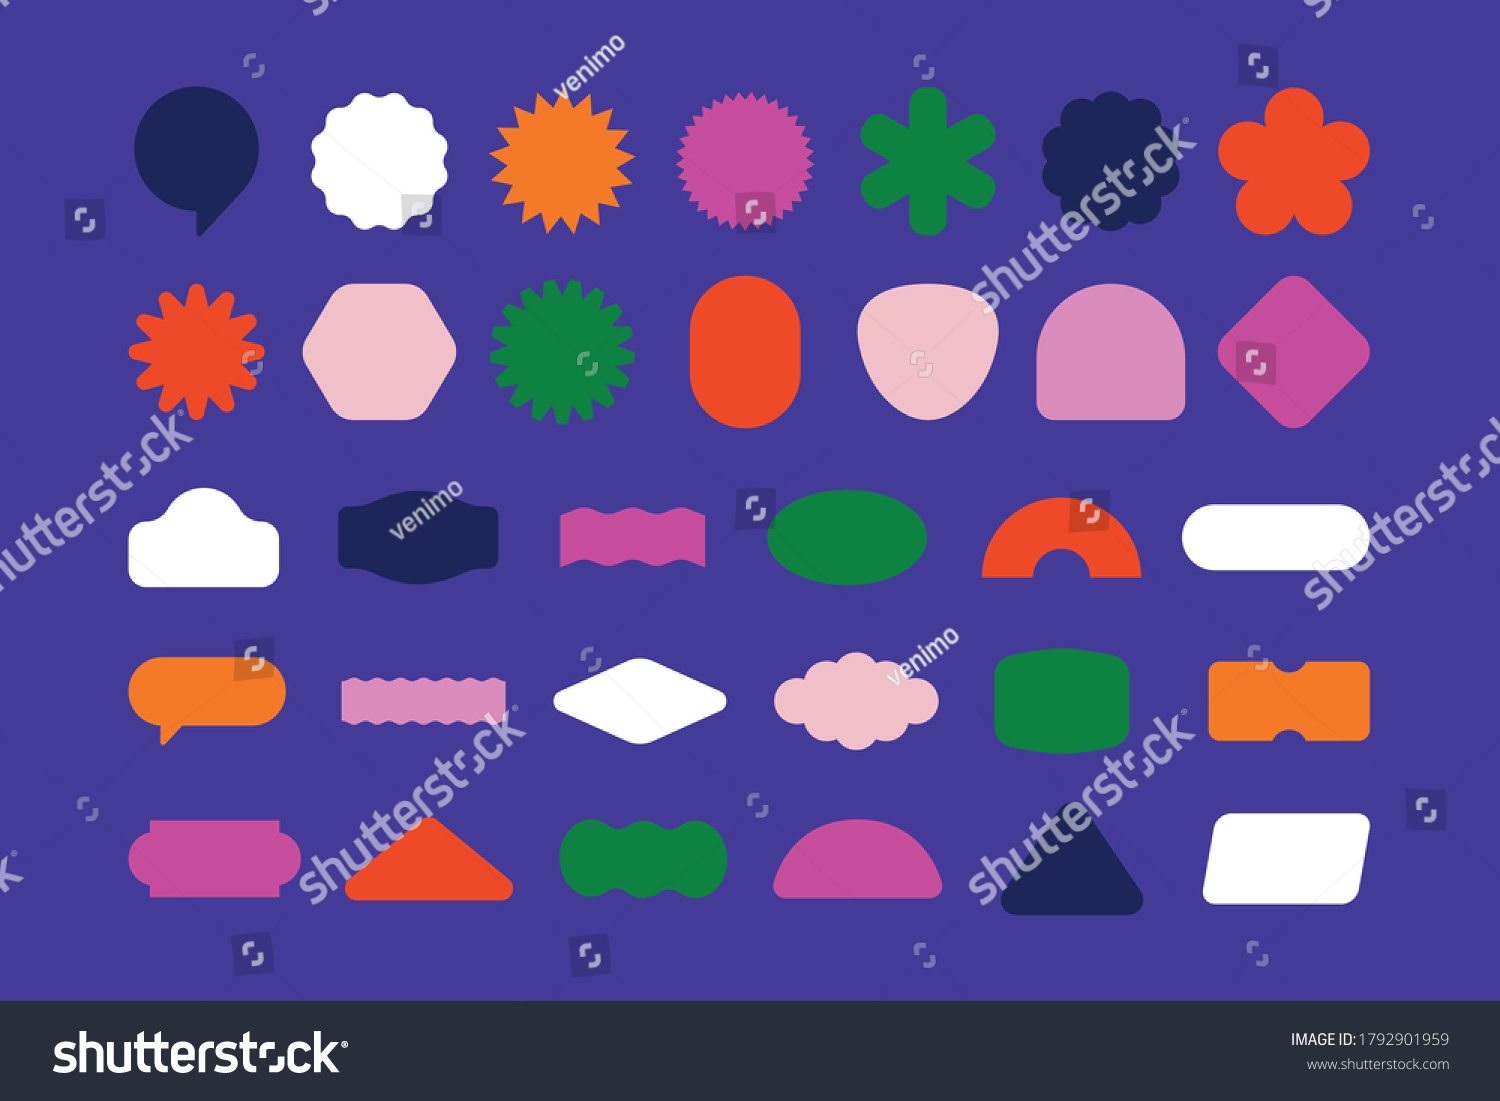 Vector set of design elements, patches and stickers with copy space for text - abstract background elements for branding, packaging, prints and social media posts #1792901959